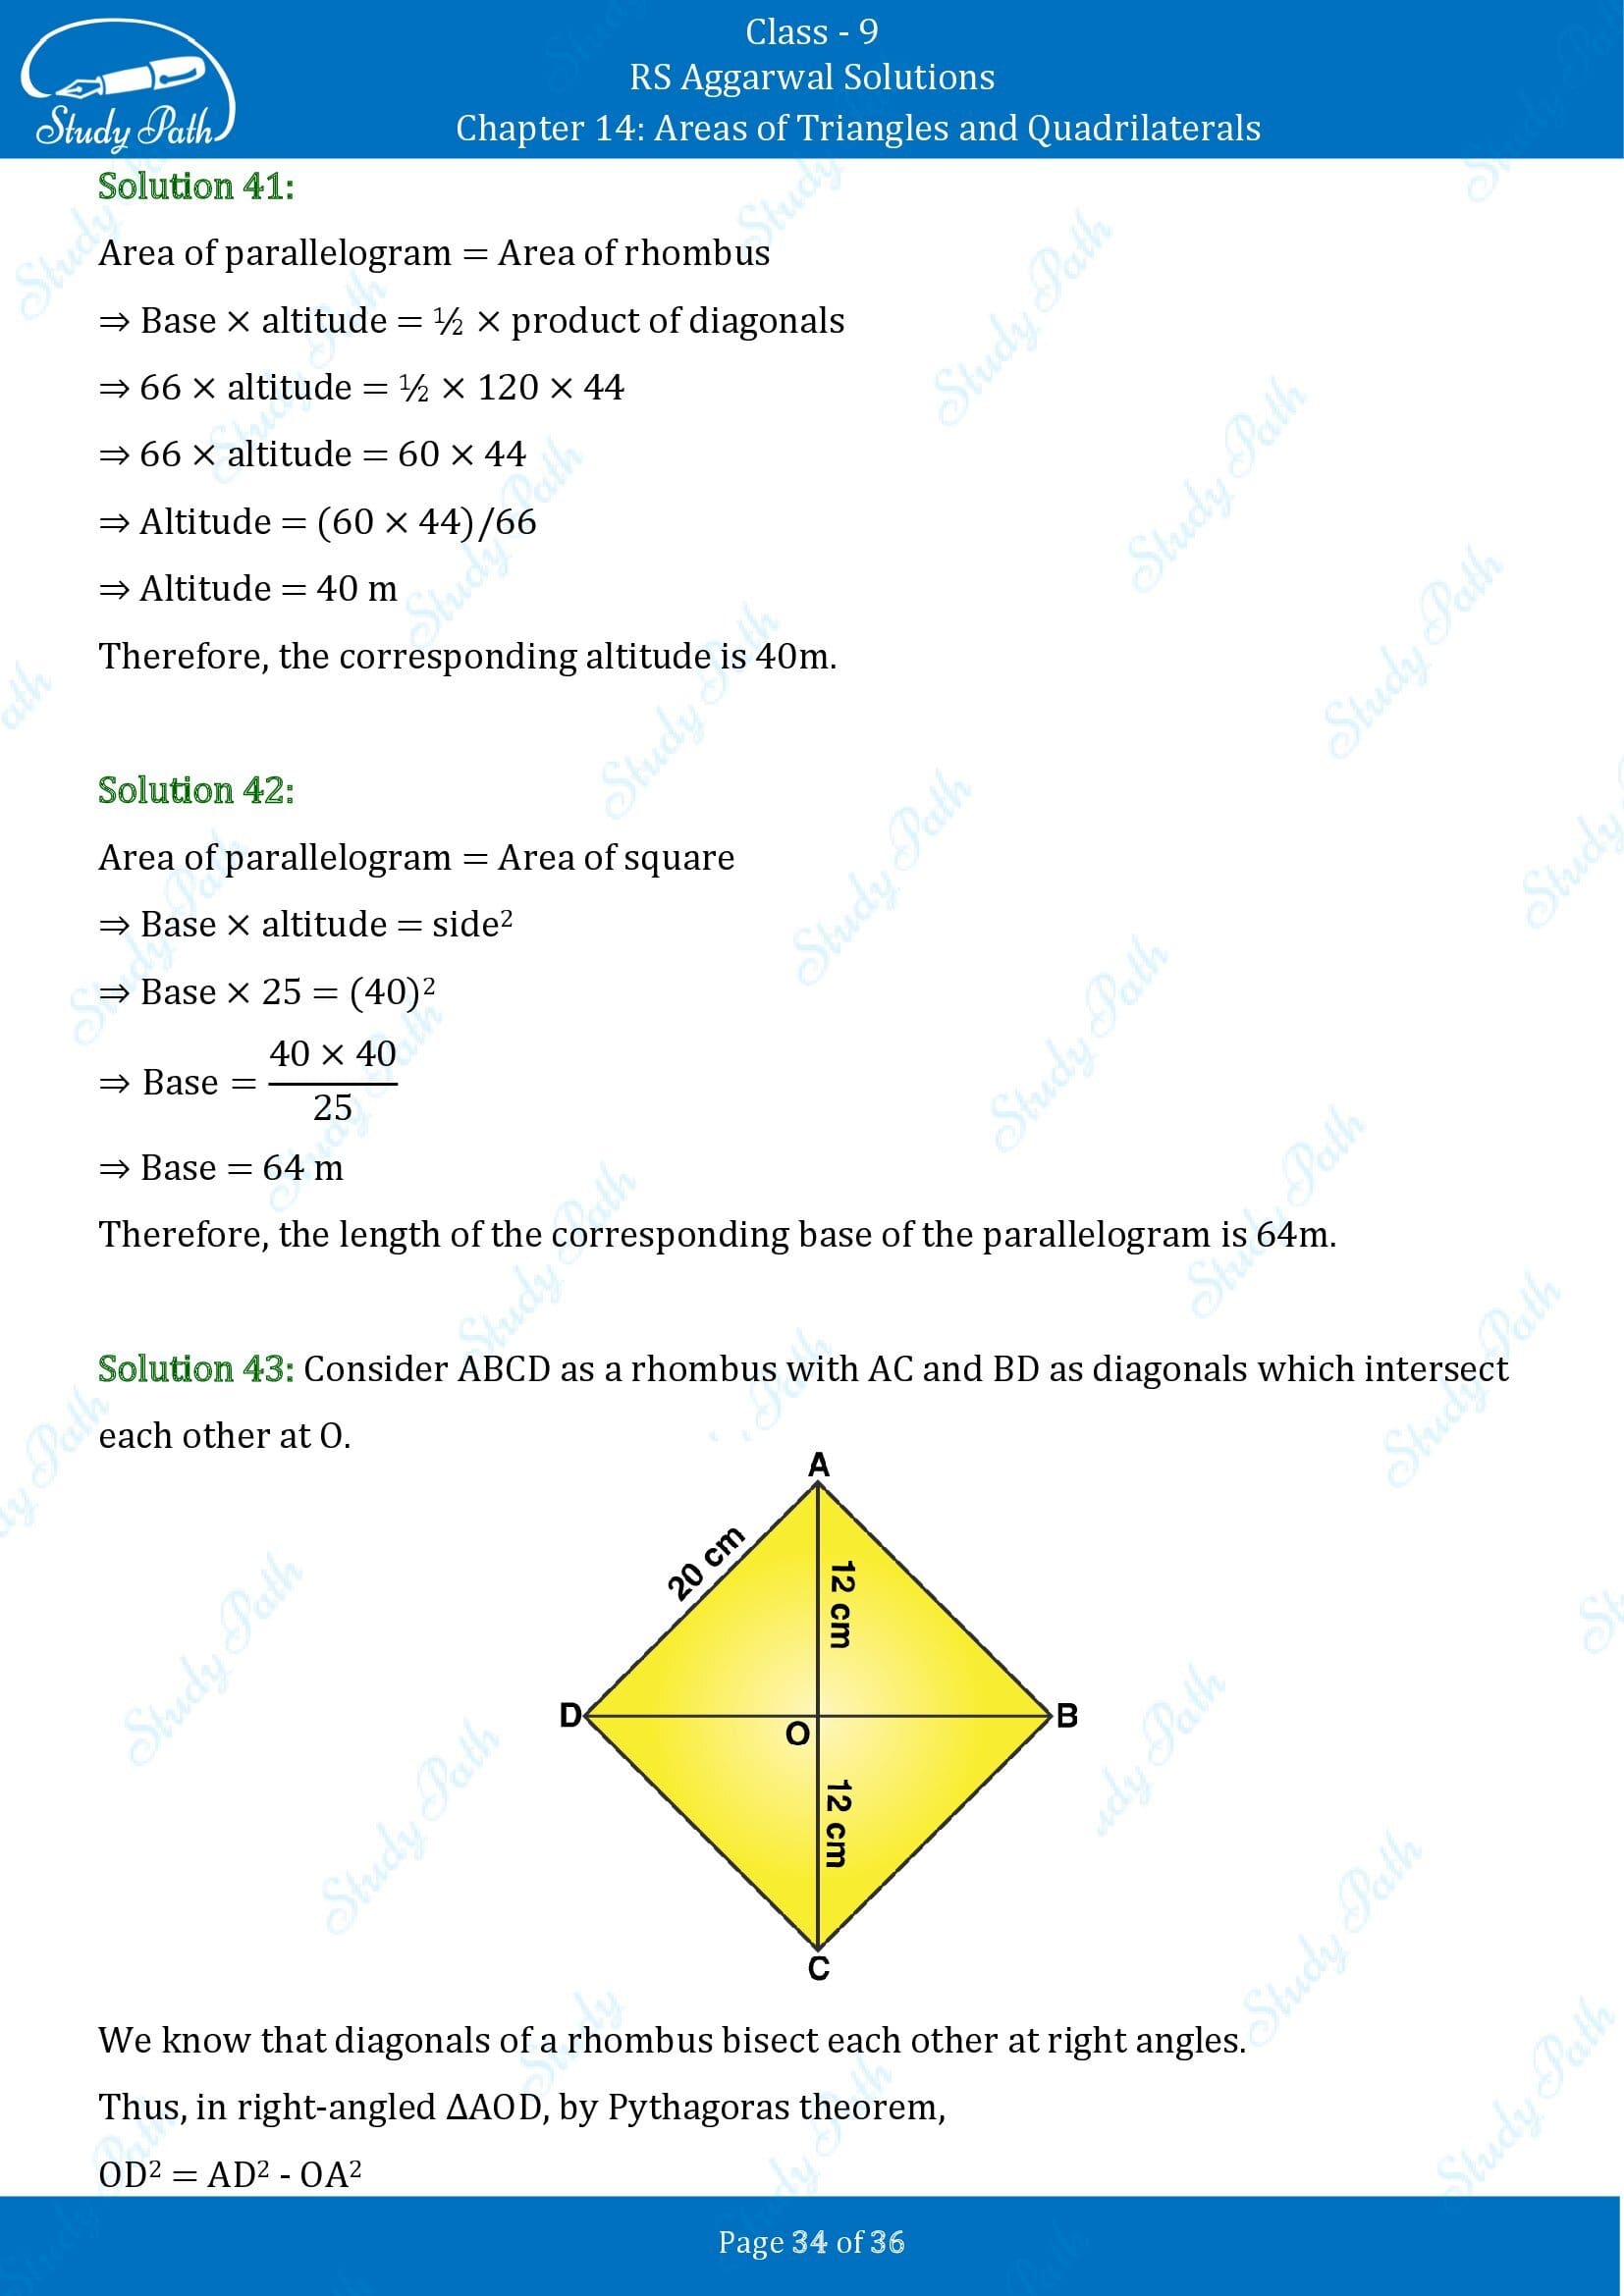 RS Aggarwal Solutions Class 9 Chapter 14 Areas of Triangles and Quadrilaterals Exercise 14 00034